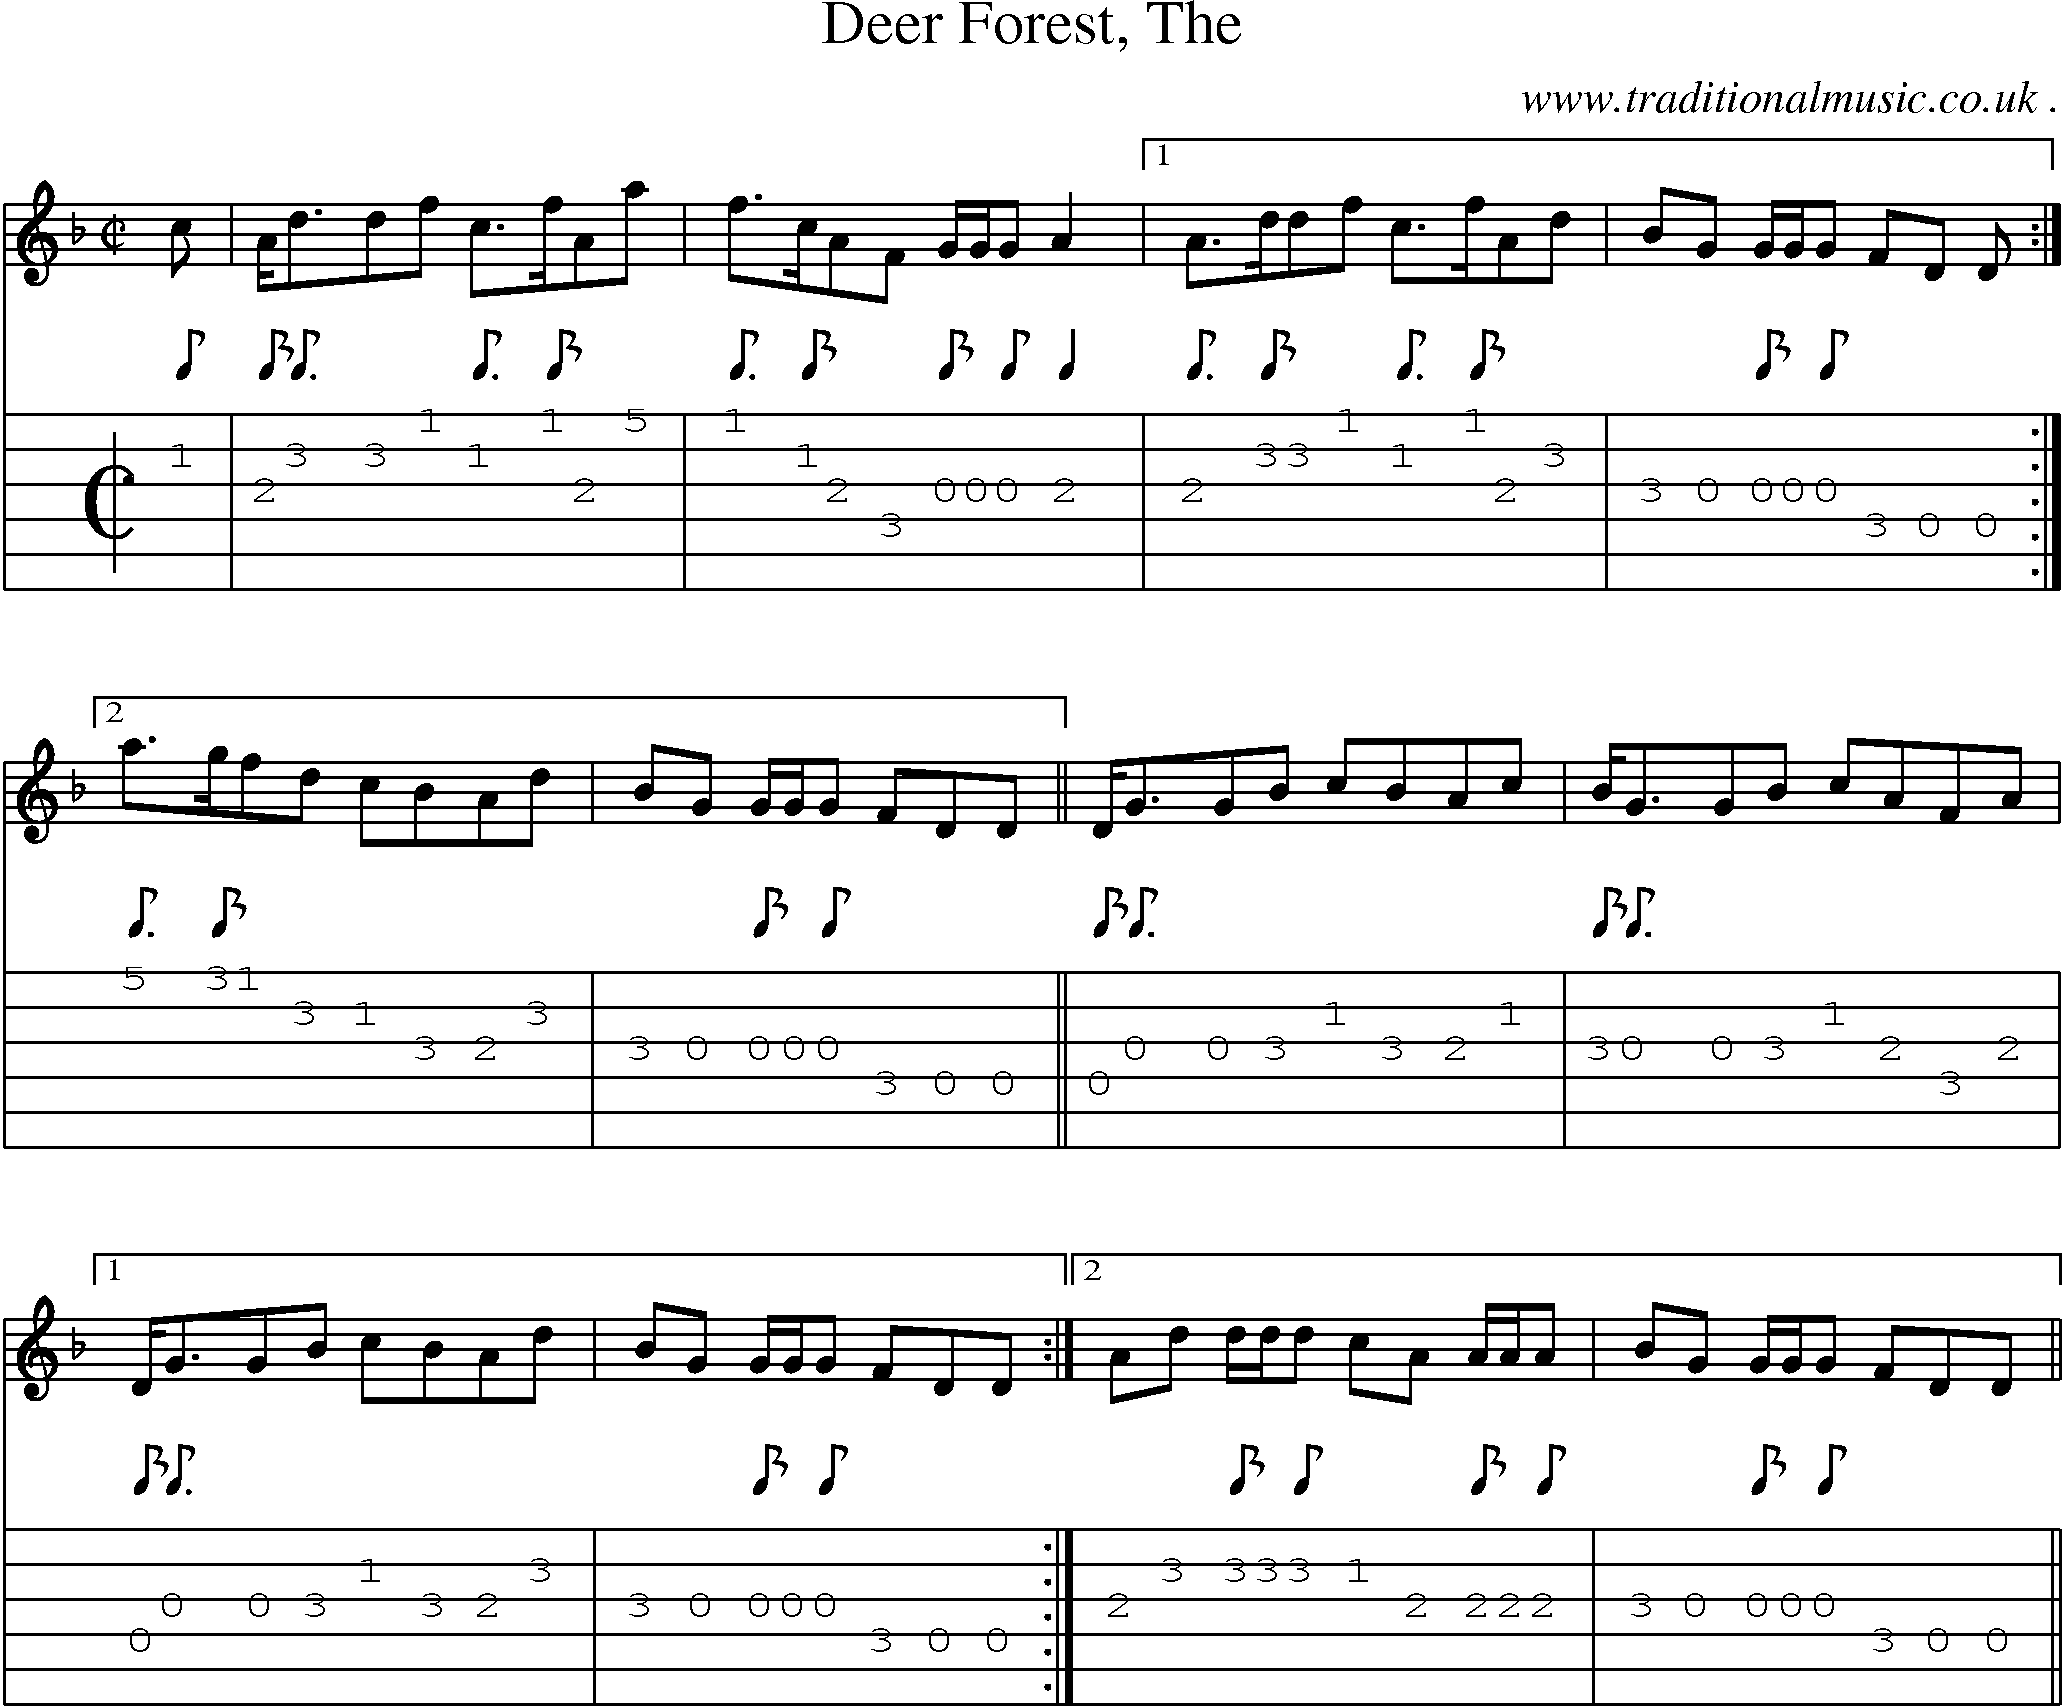 Sheet-music  score, Chords and Guitar Tabs for Deer Forest The